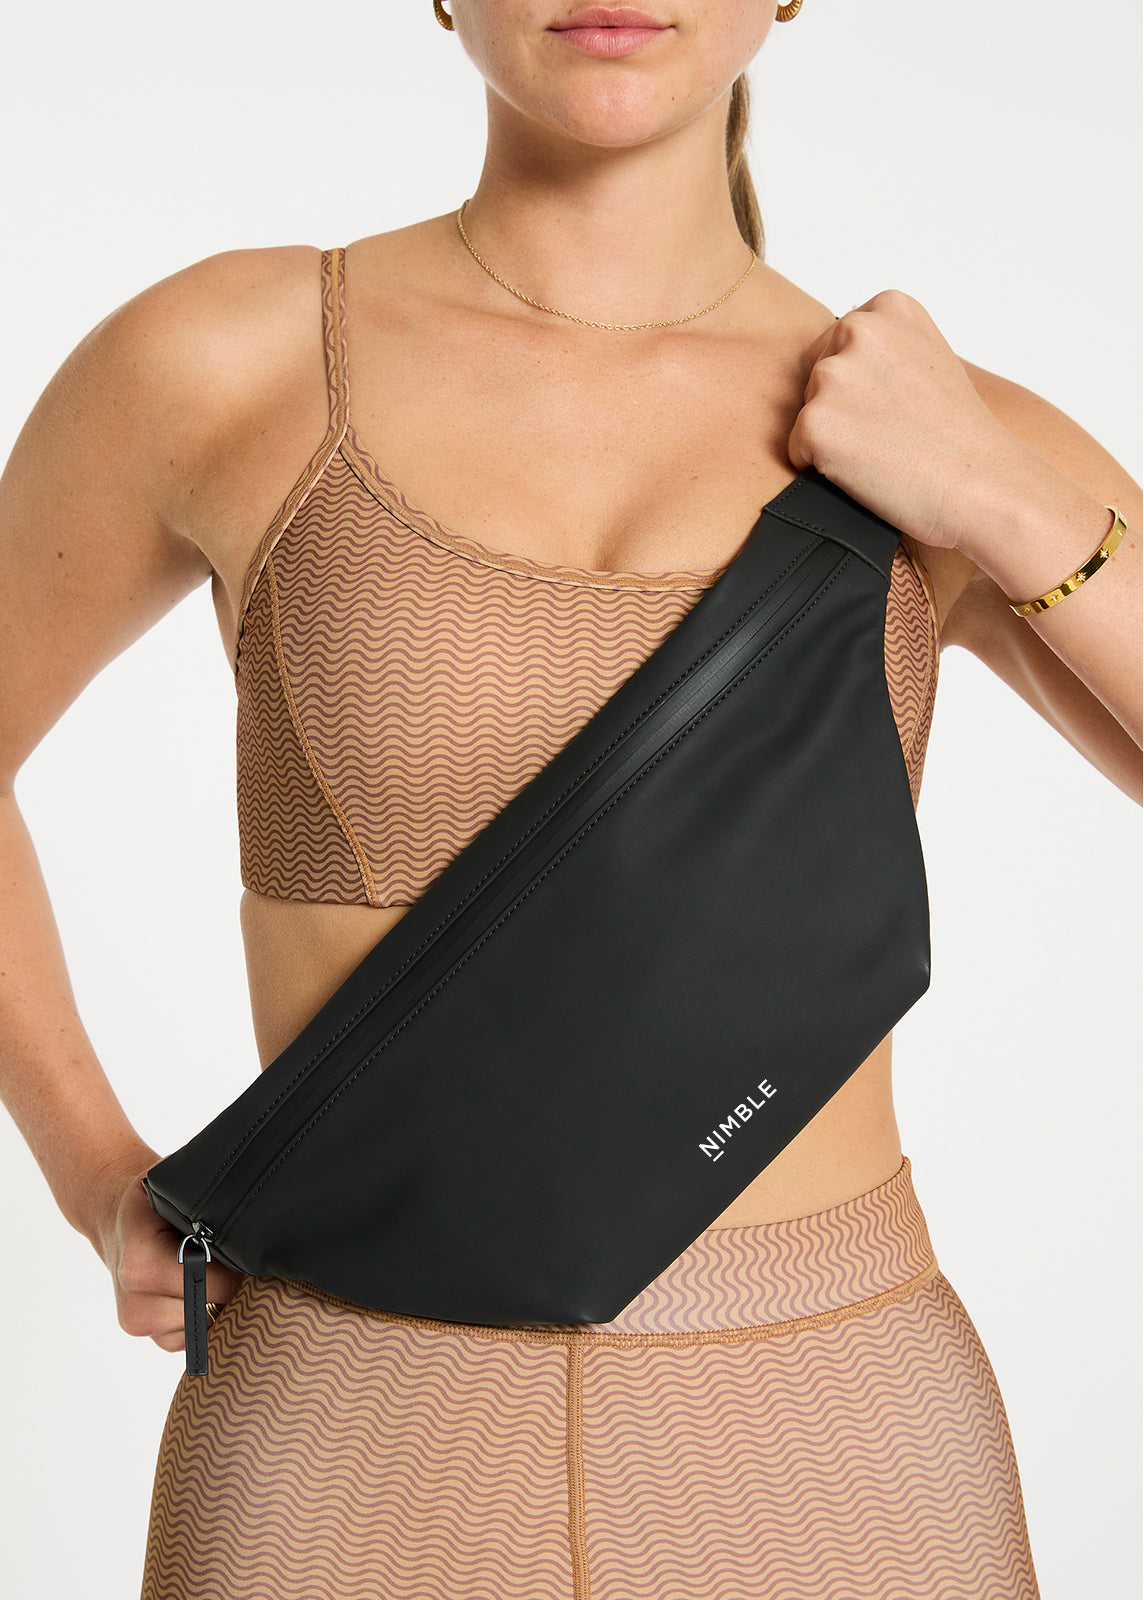 Close Up Of Model Stood Facing Forward Wearing A Black Splash Proof Cross Body Bag With Contrasting White Nimble Logo To The Centre Bottom.